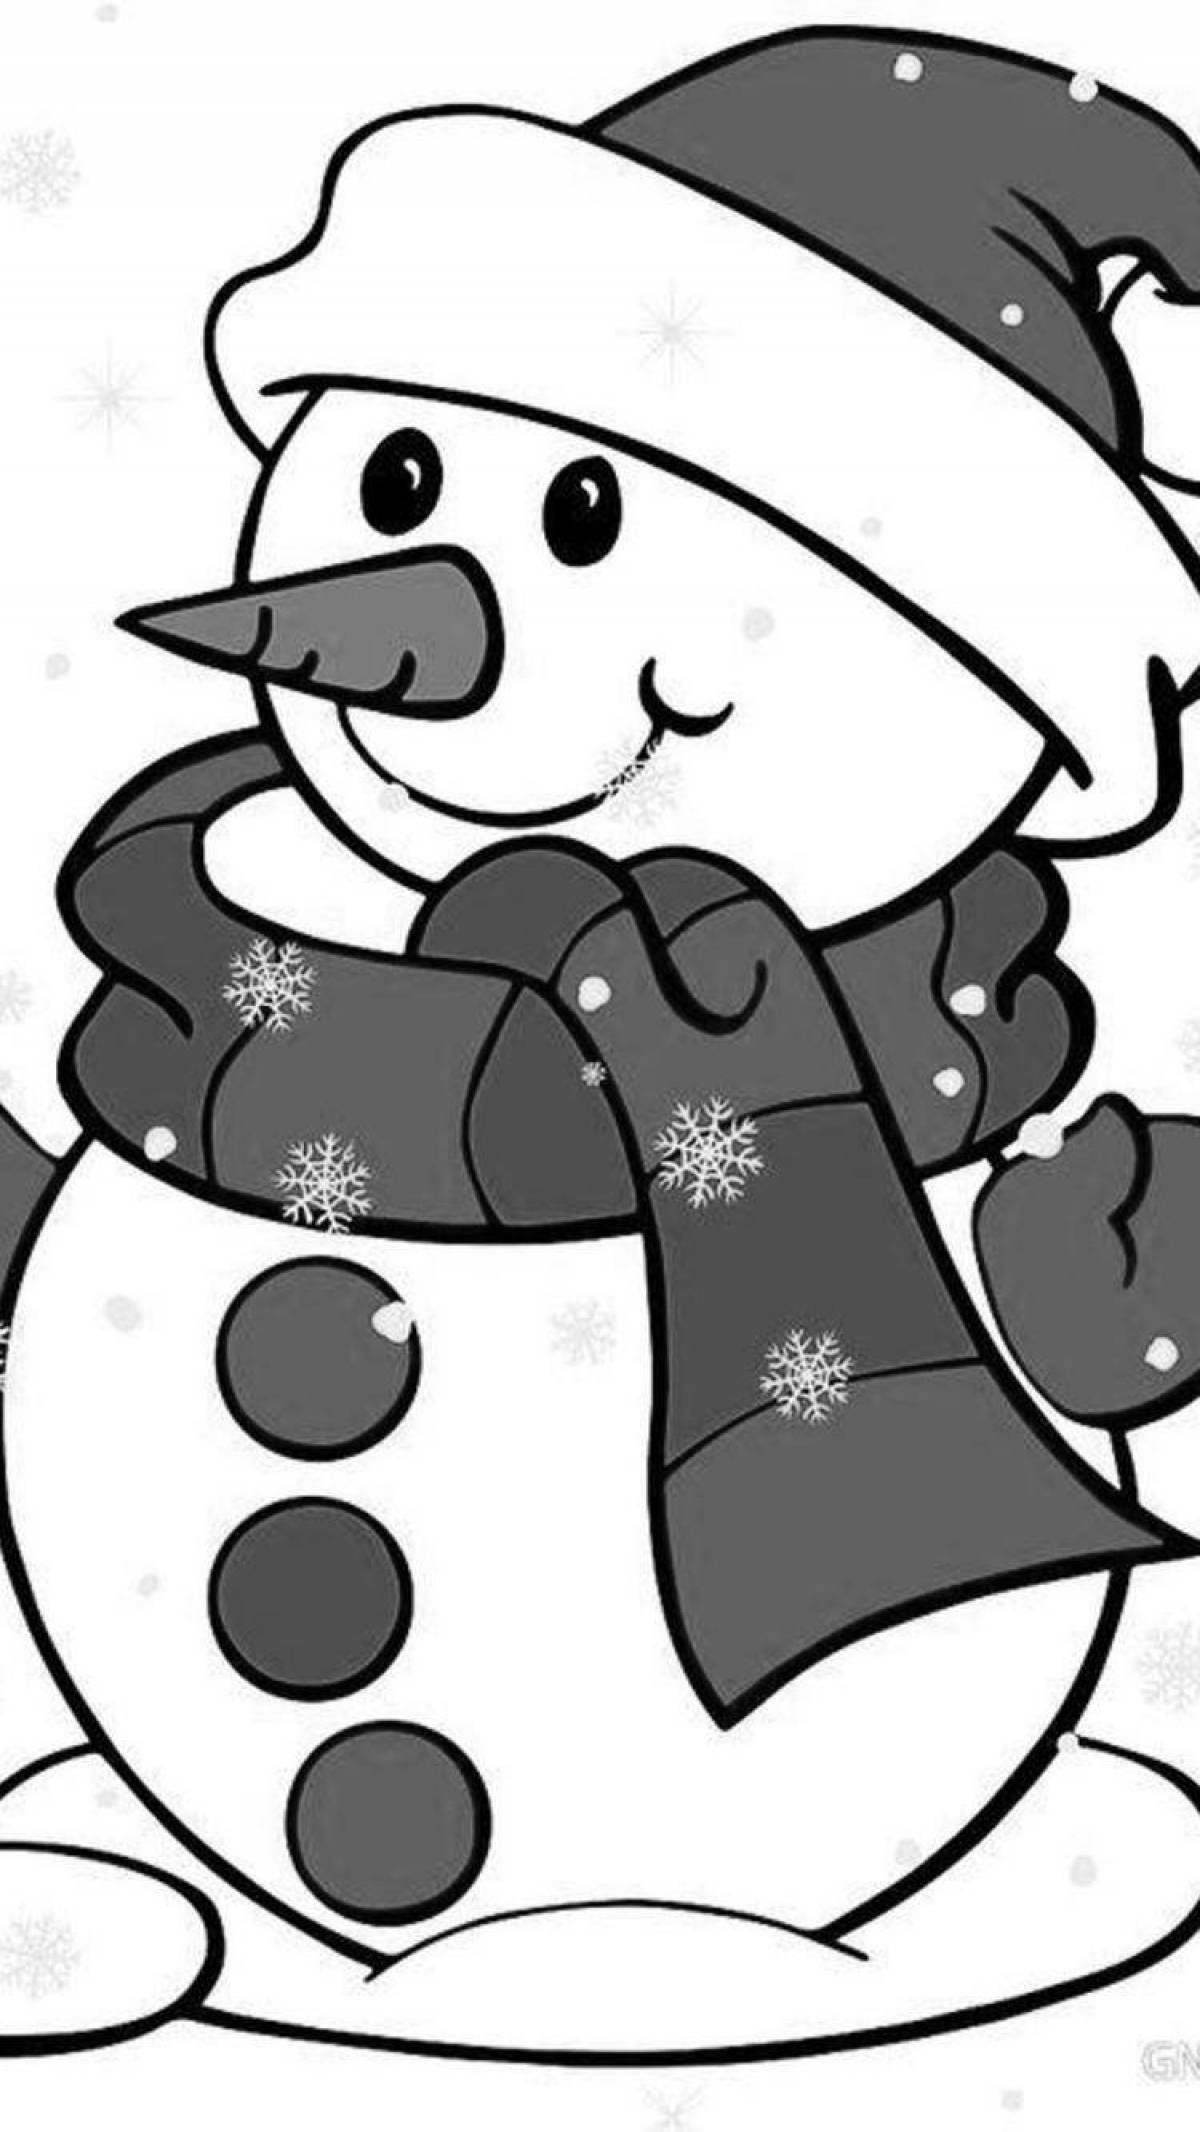 Glorious coloring snowman colored